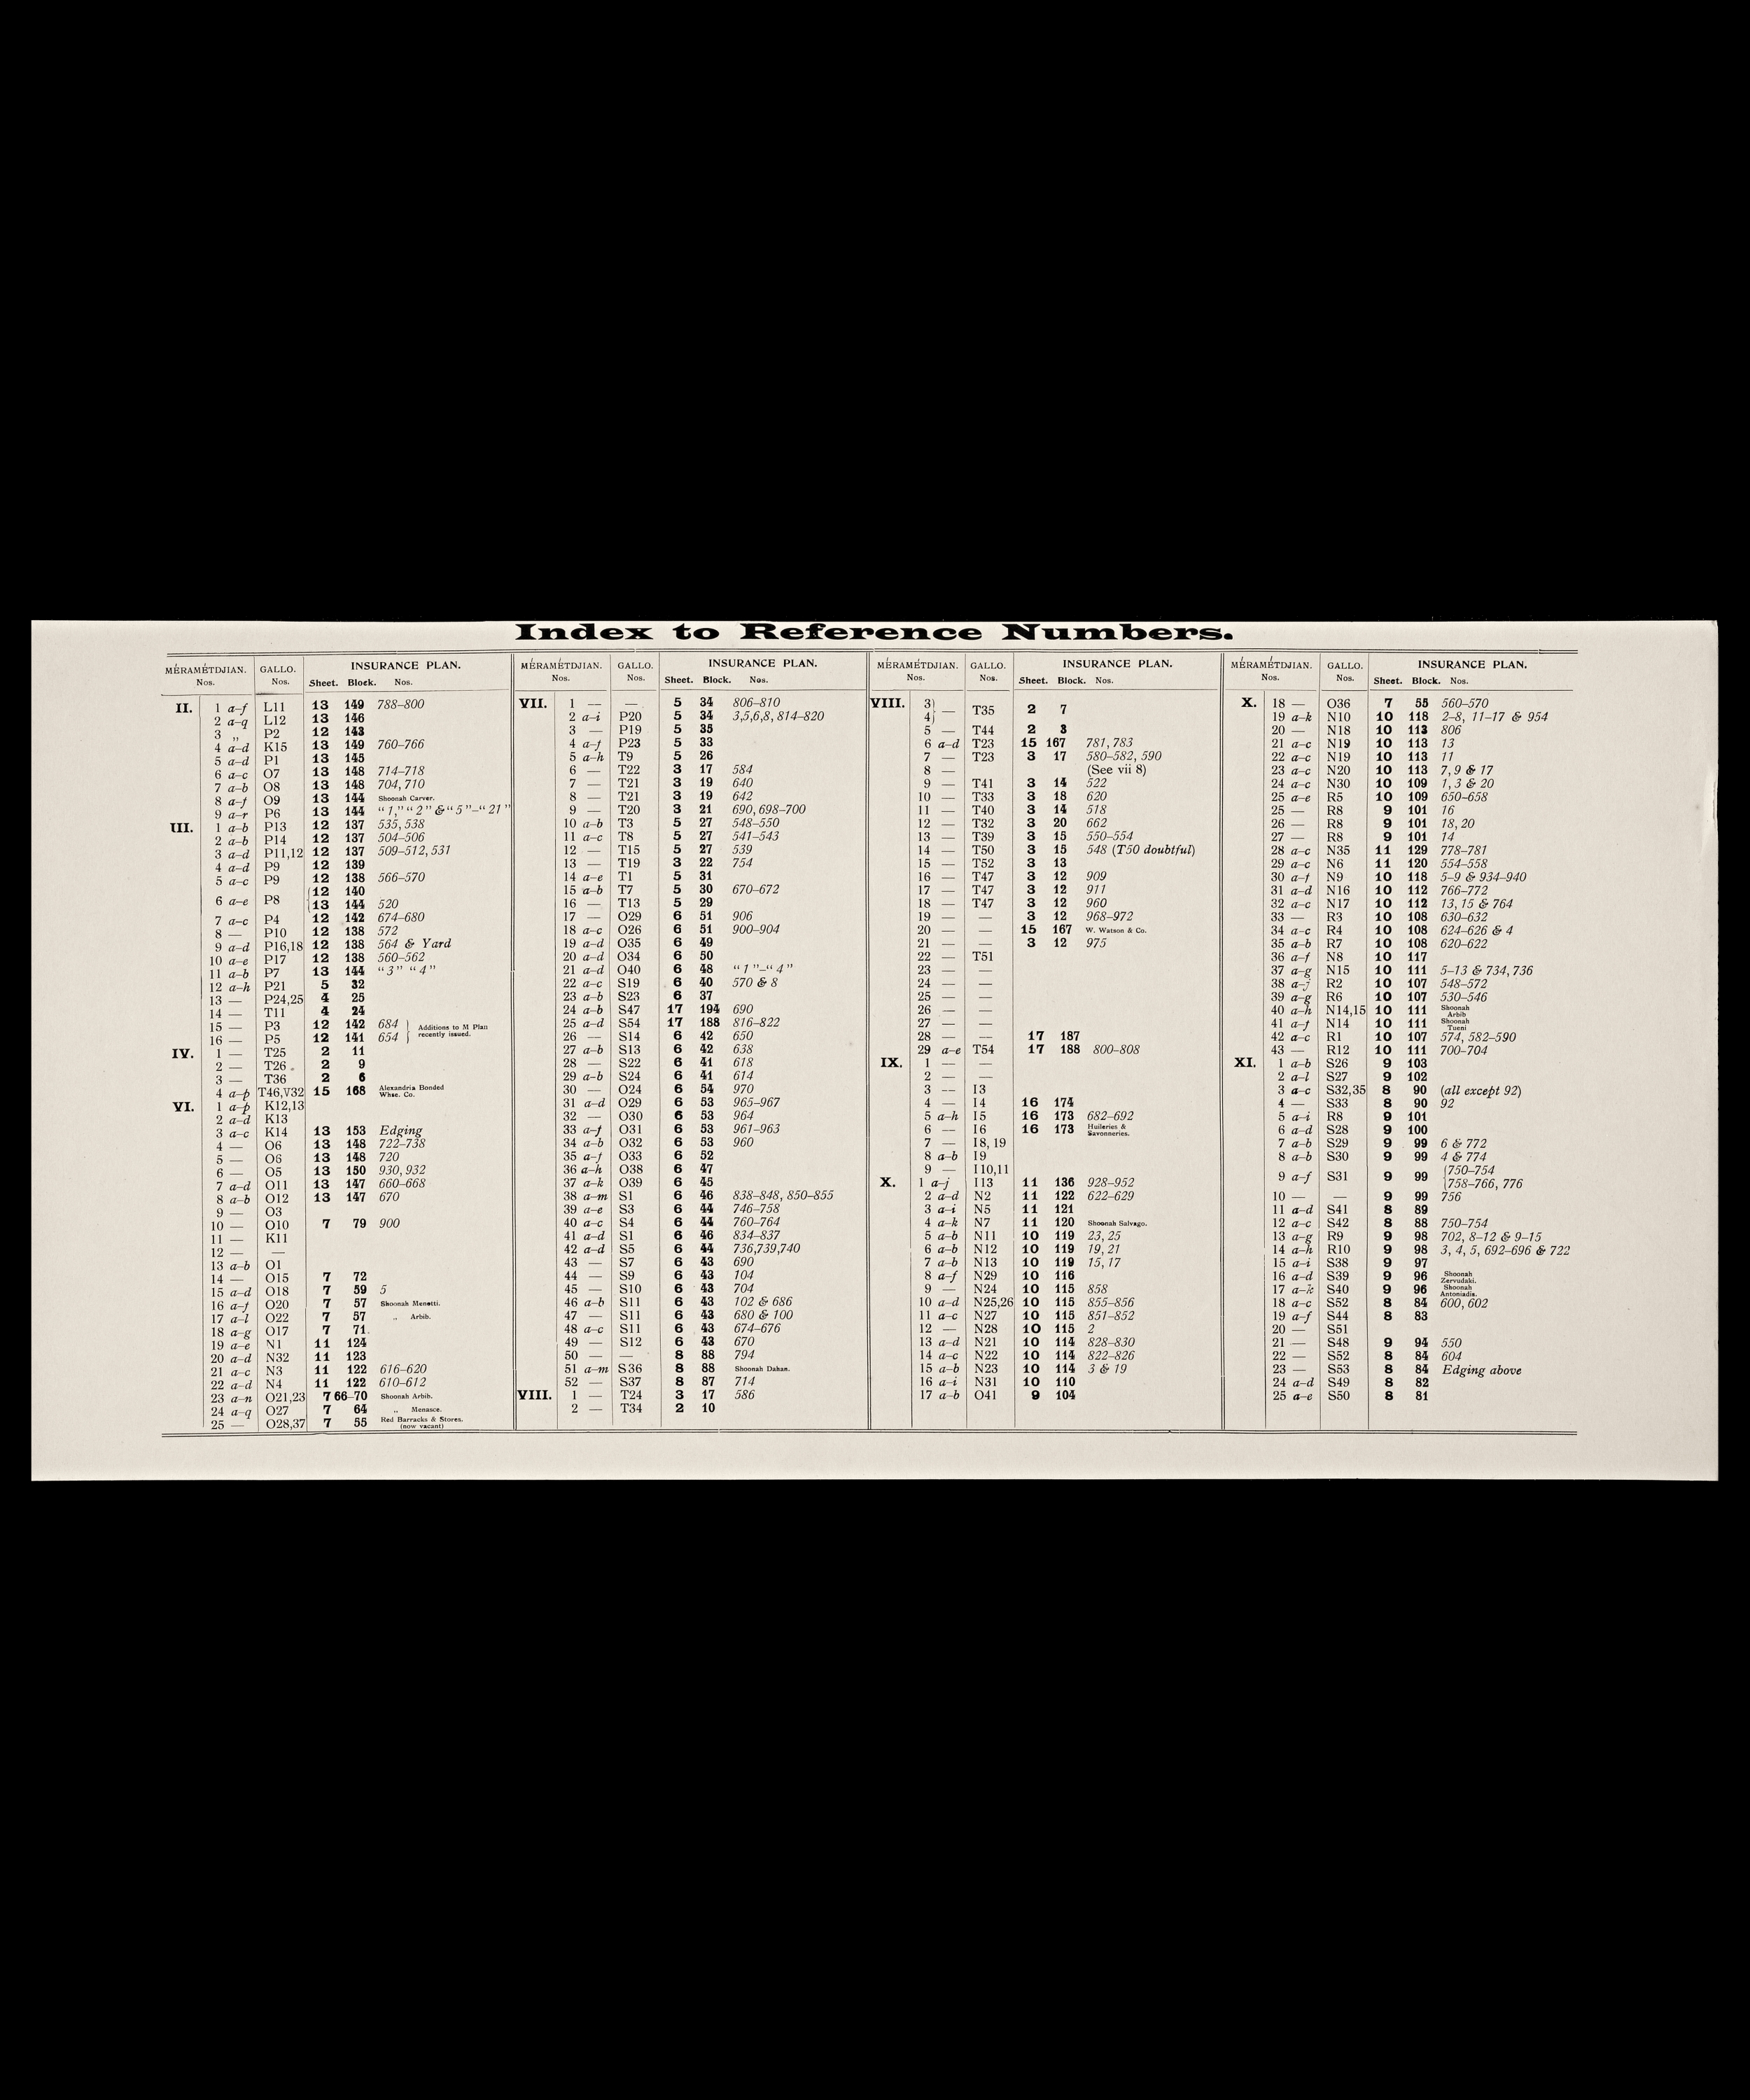 Index to Reference Numbers, Insurance Plan of Alexandria, Vol. I